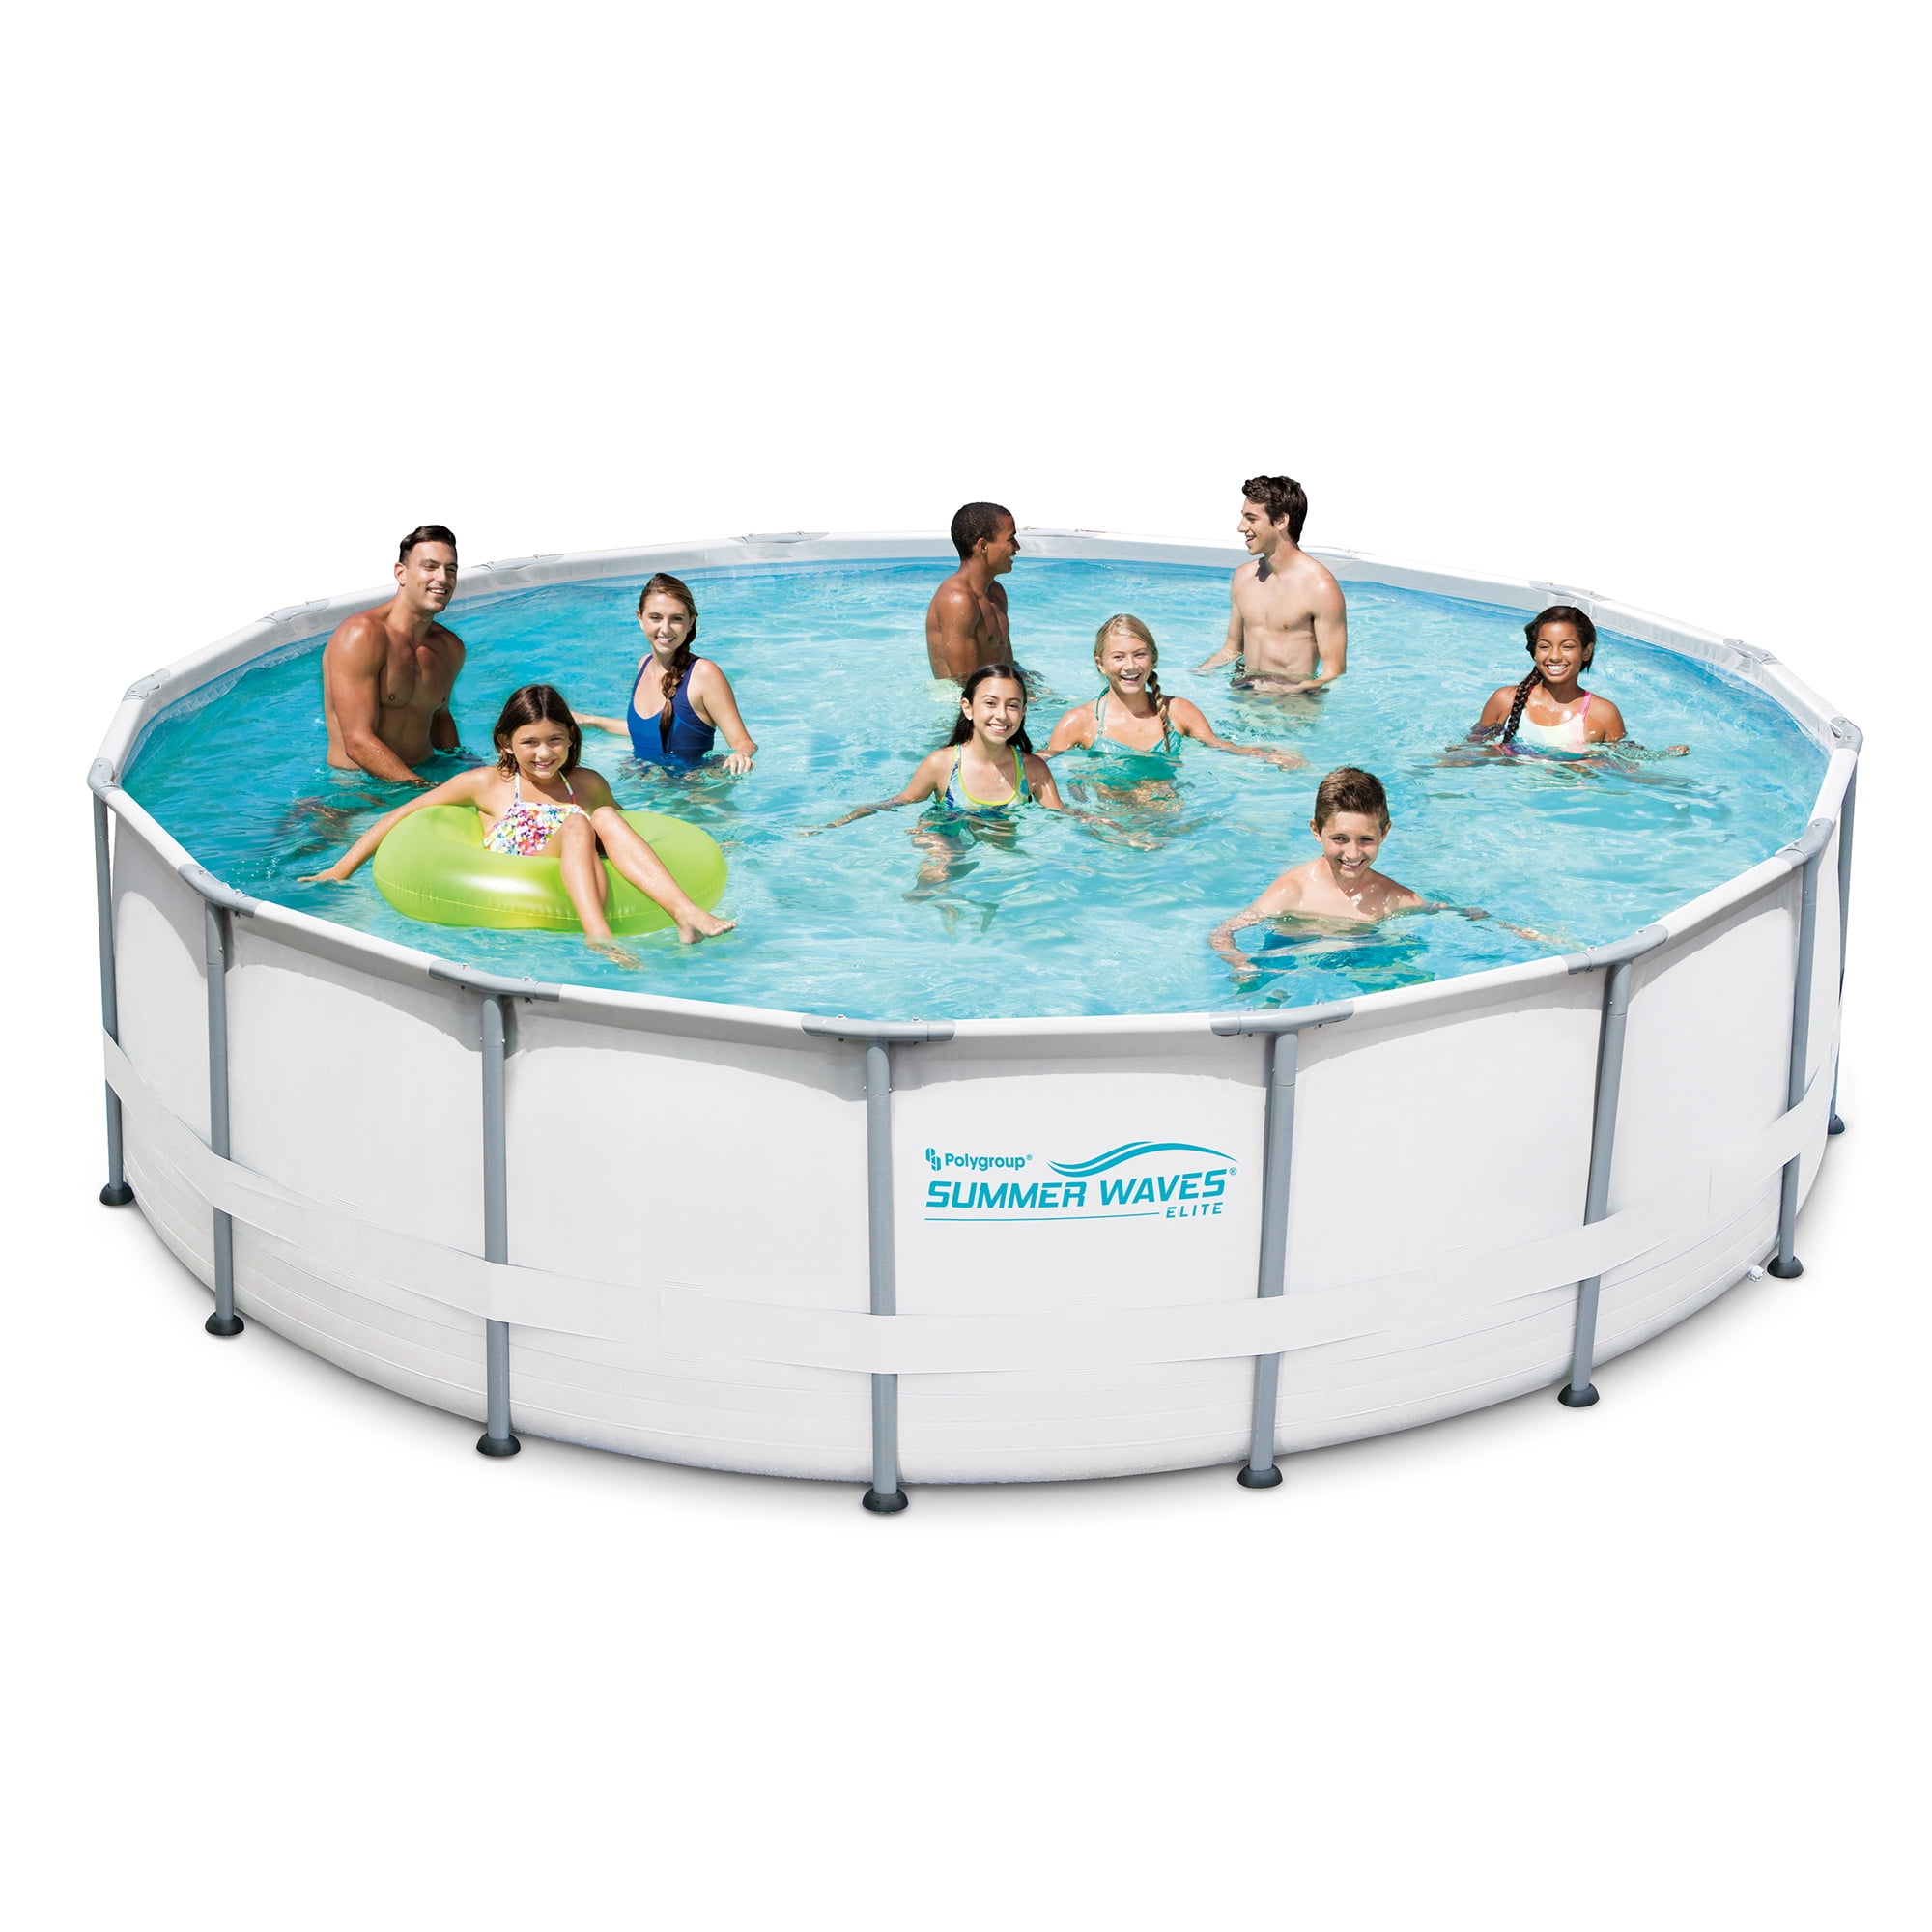 Summer Waves® 16ft Elite Frame Pool with Filter Pump, Cover, and Ladder | Swimmingpools